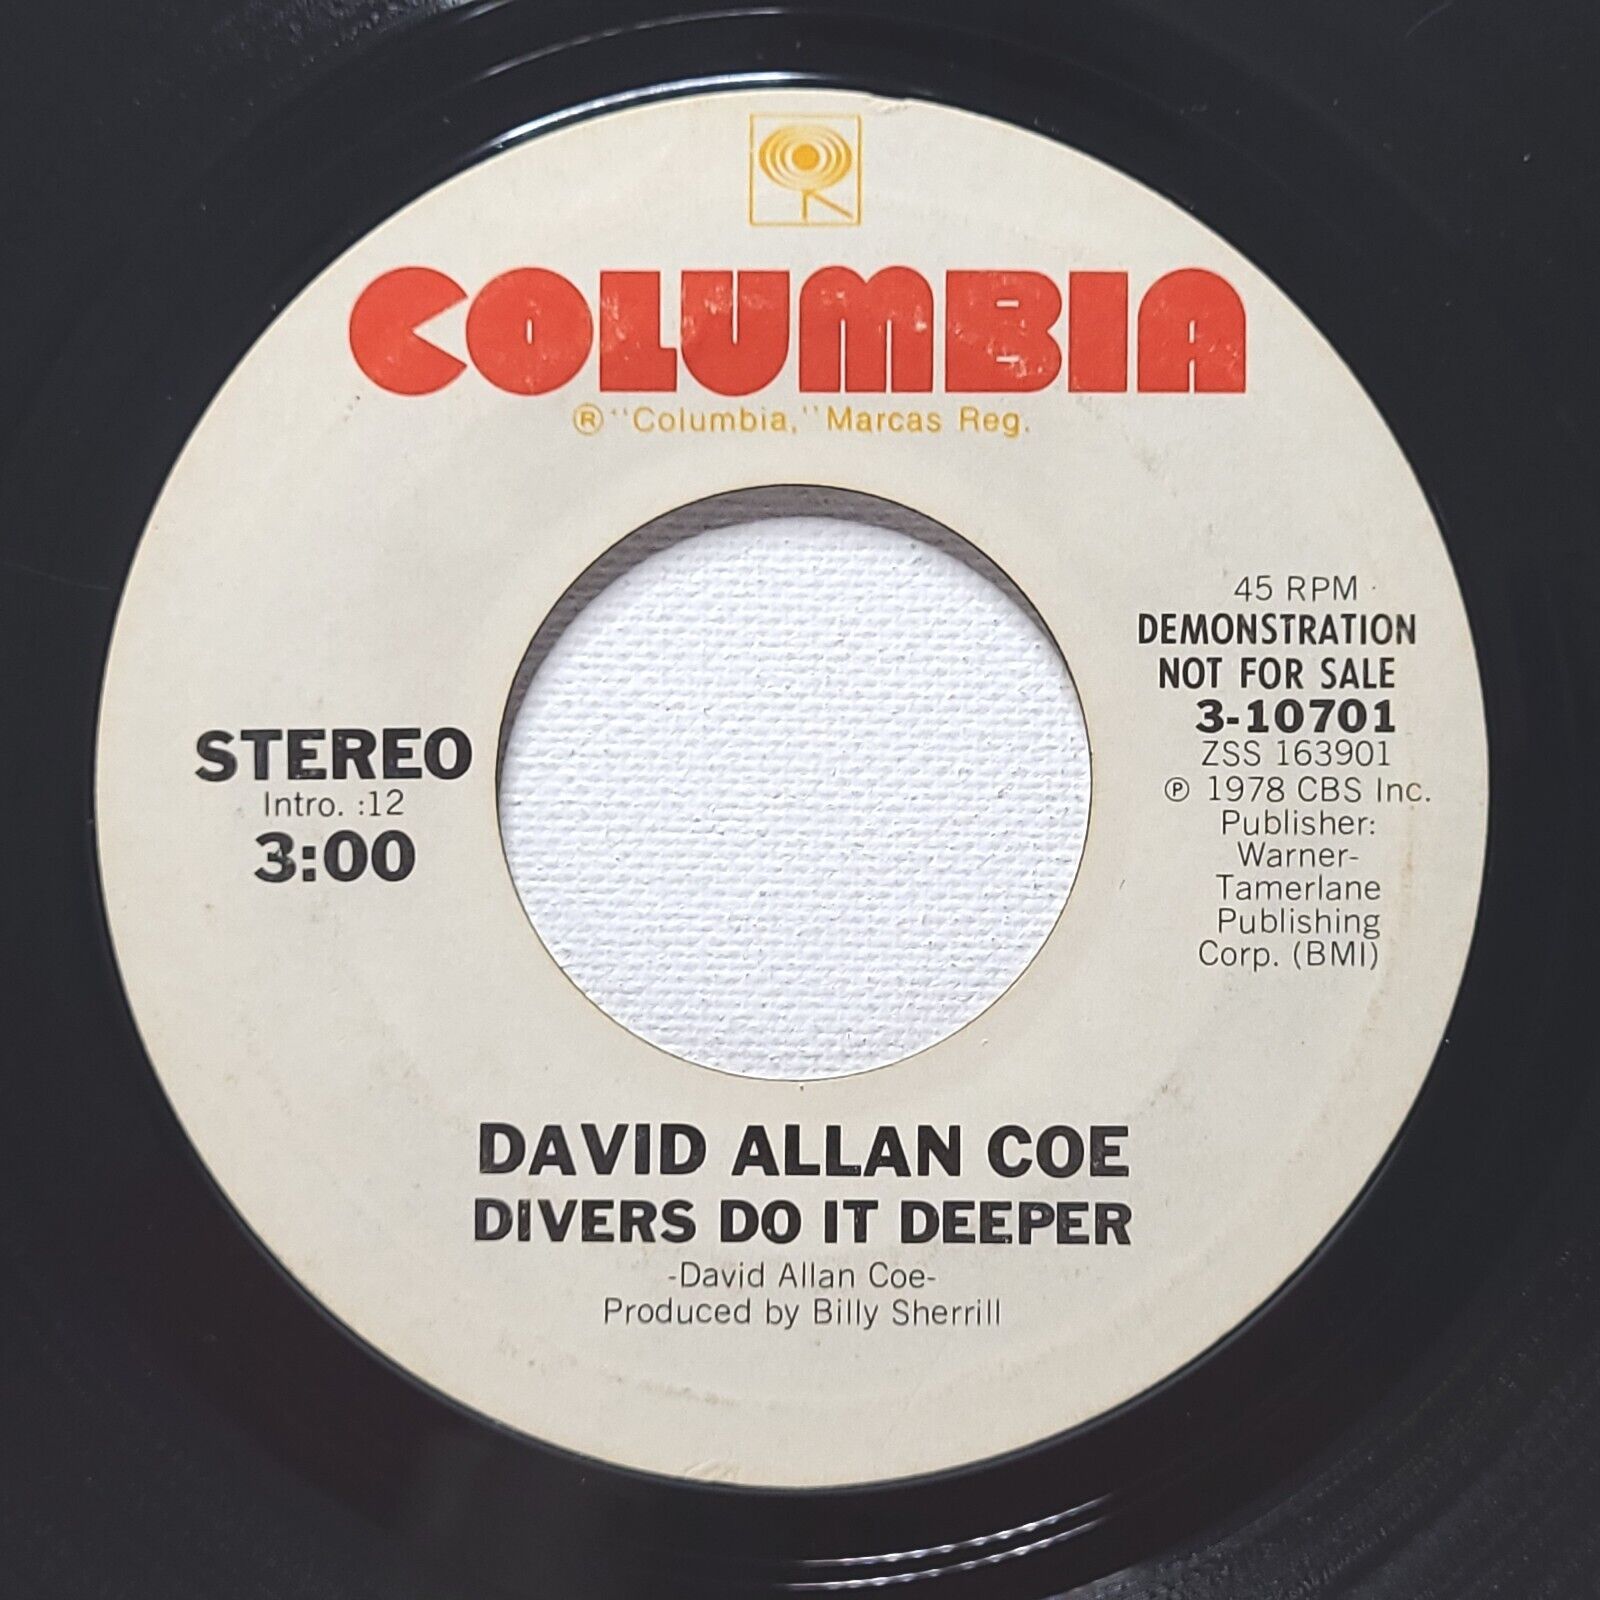 David Allan Coe 45 Record Promo Divers Do It Deeper on Columbia VG+ Country 